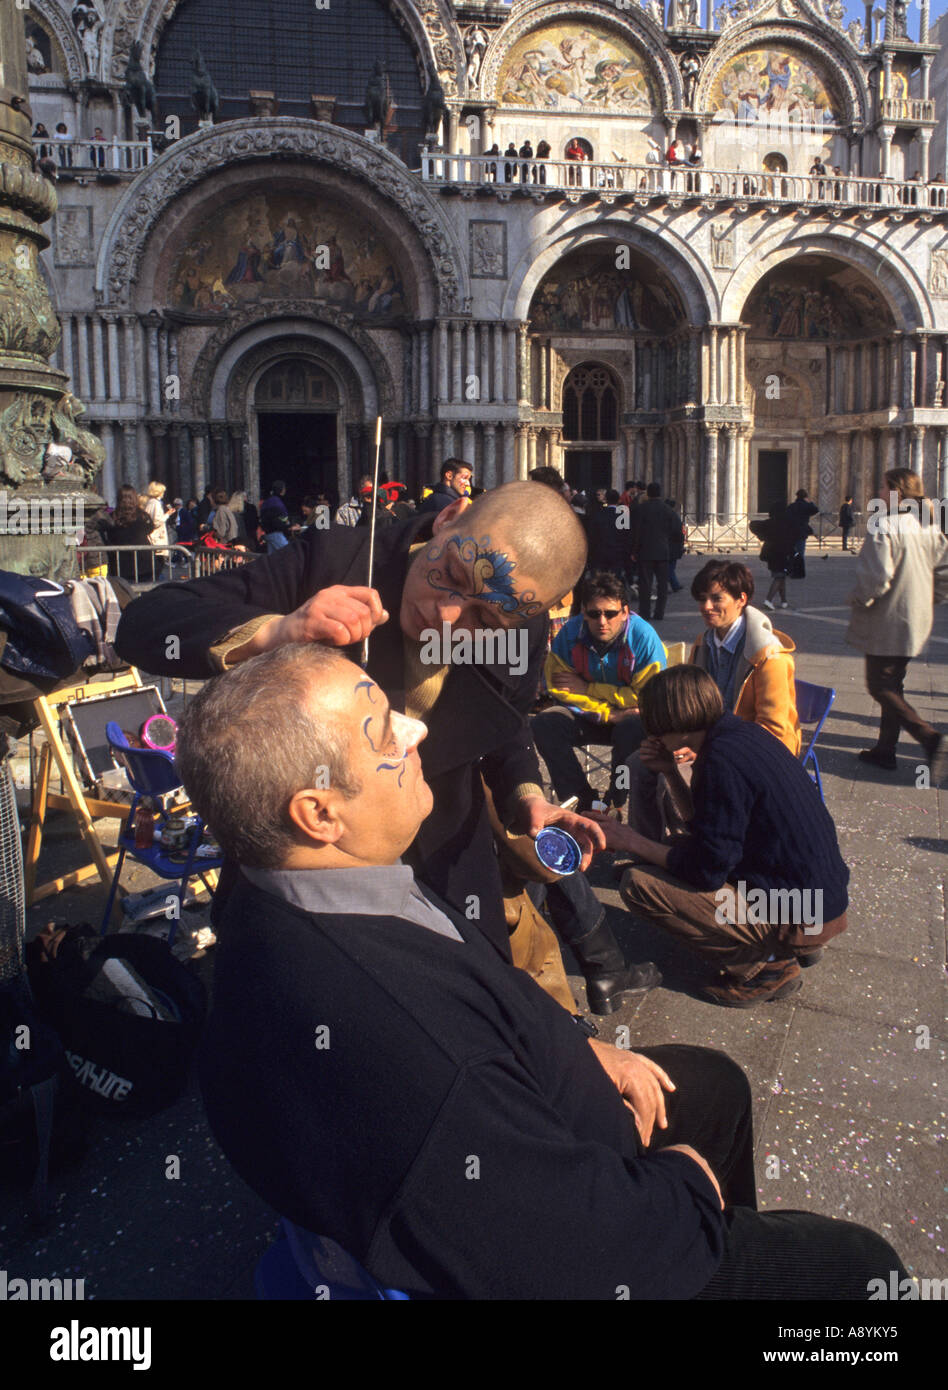 street artist painting the face of a tourist during the carnival in Piazza San Marco Venice Italy Stock Photo